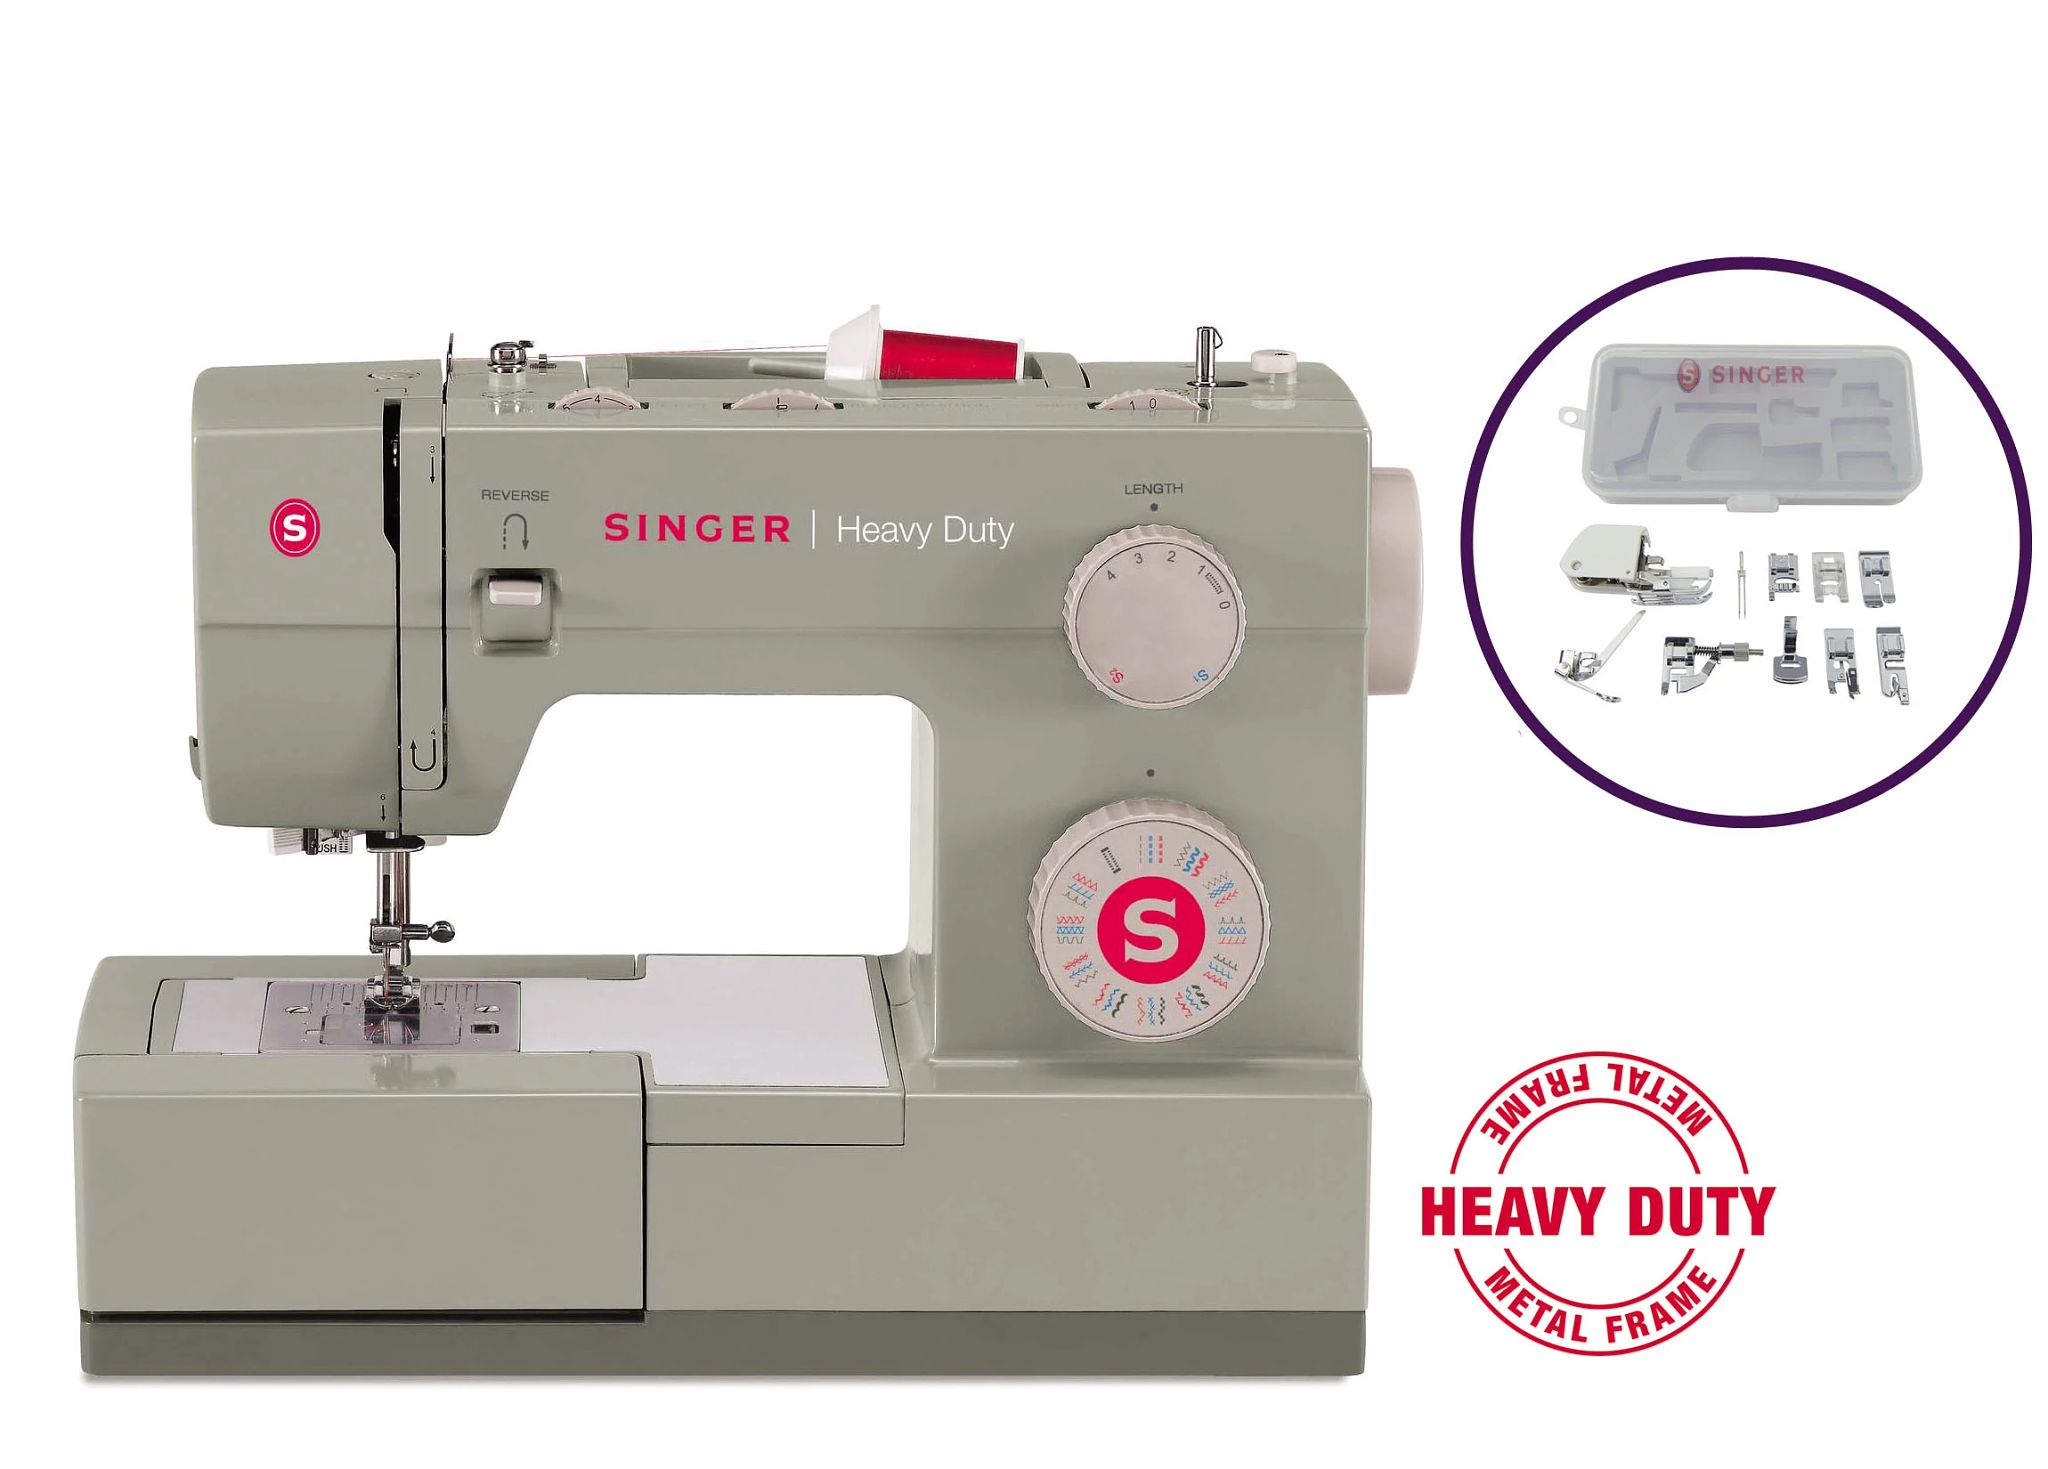 Singer HD0450S Heavy Duty Serger save $100 now only $299.99!